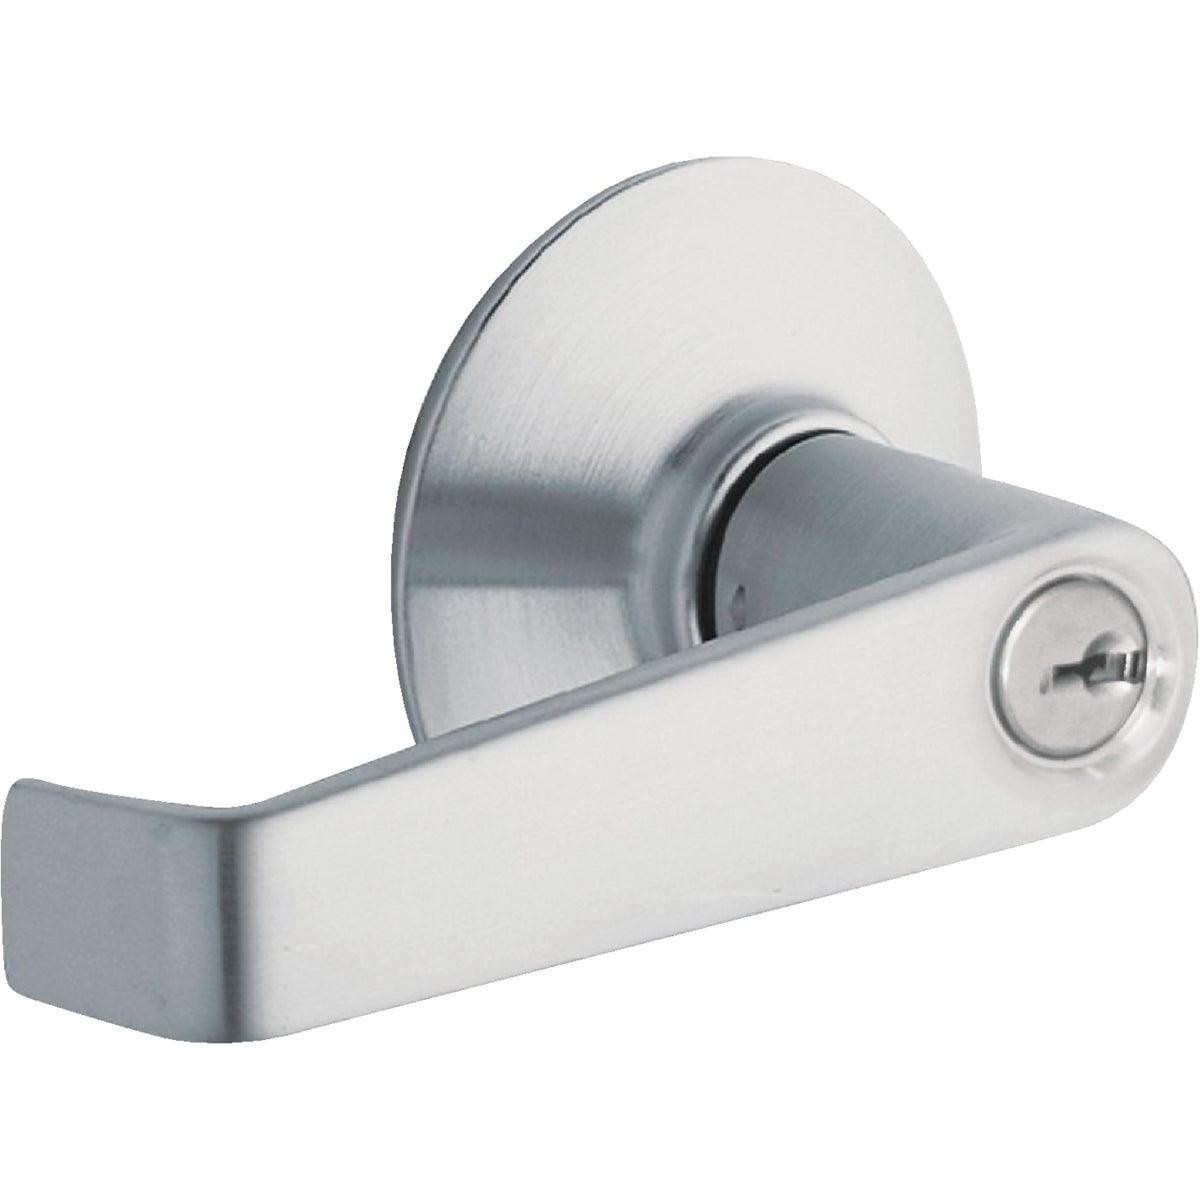 Item 241250, Light-duty commercial entry lever. Performance complies with ANSI A156.